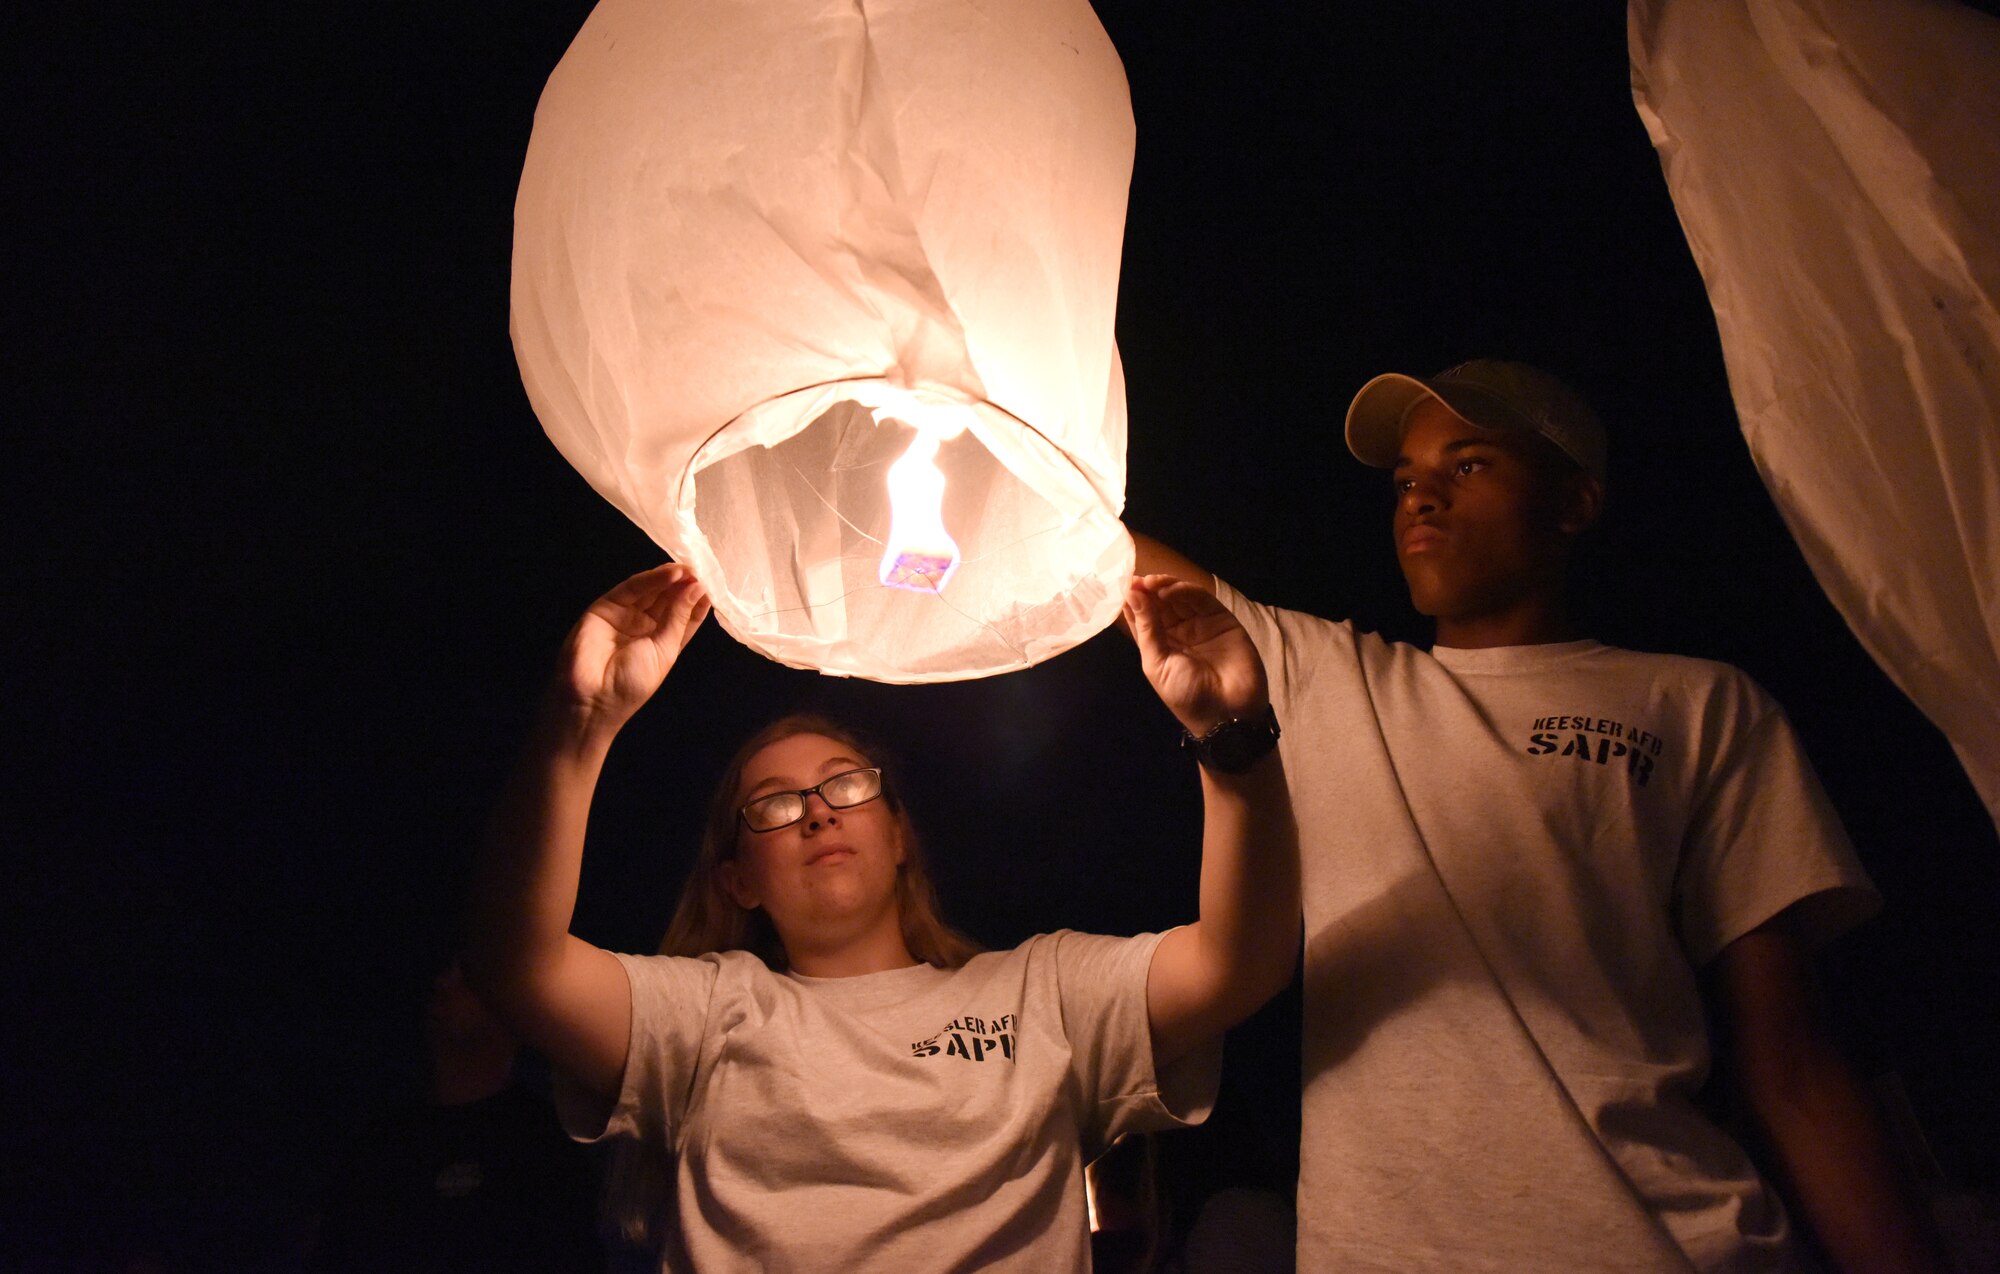 U.S. Air Force Airman 1st Class Tory Battles, and Airman Stephen Chapa, 336th Training Squadron students, prepare to let go of a sky lantern during a sky lantern vigil on Biloxi Beach, Mississippi, Sept. 27, 2018. In recognition of suicide prevention and awareness month, the 81st Medical Operations Squadron mental health team hosted the themed event, Lights For Life, to honor the memories of victims of suicide. (U.S. Air Force photo by Kemberly Groue)